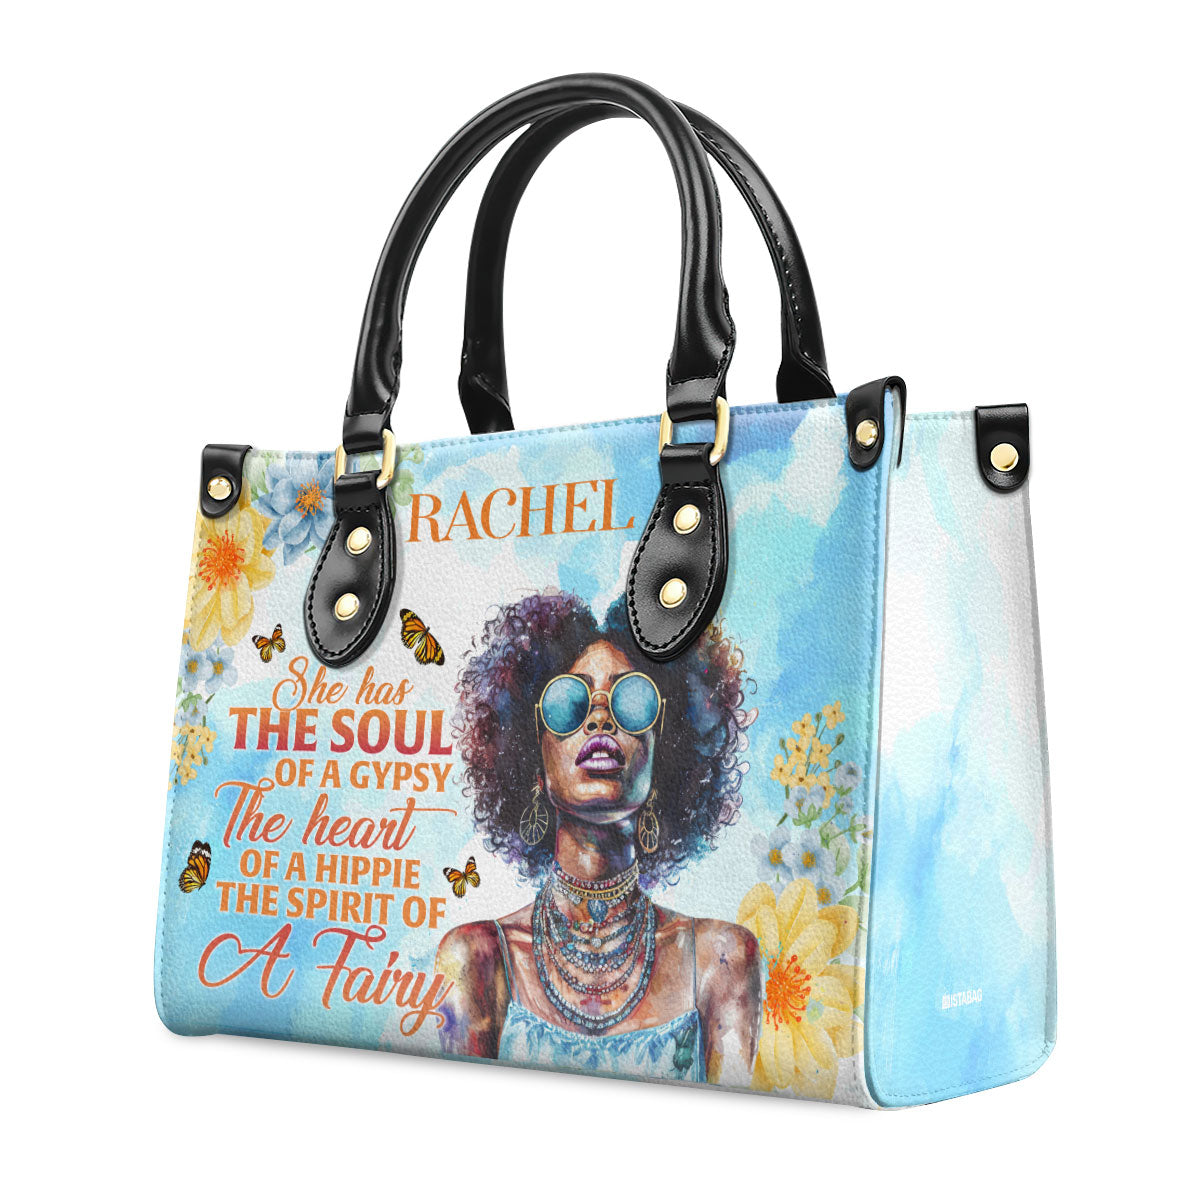 She Has The Soul Of A Gypsy - Personalized Leather Handbag SBN07